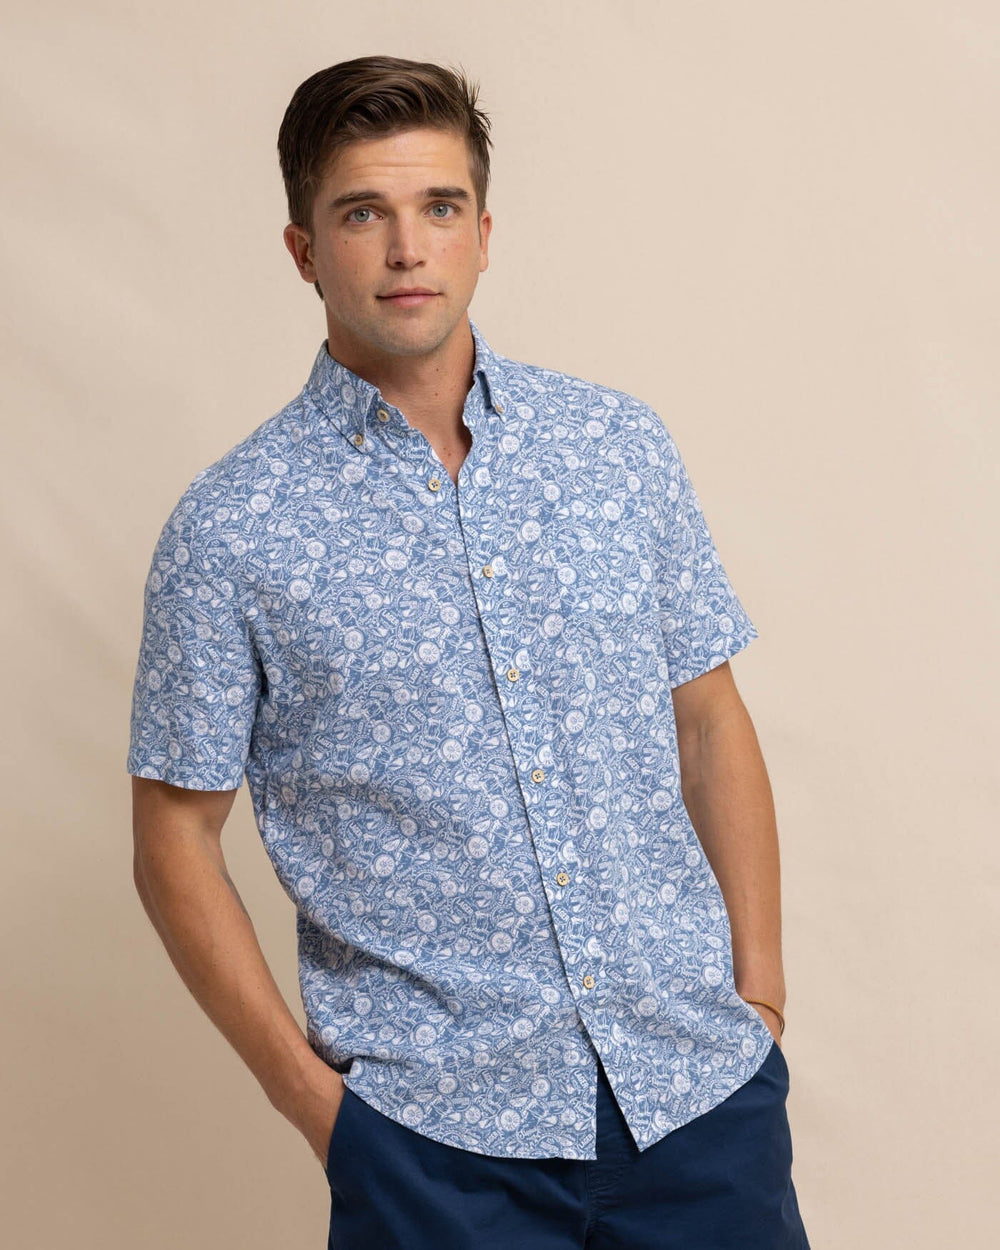 The front view of the Southern Tide Linen Rayon Caps Off Short Sleeve Sport Shirt by Southern Tide - Coronet Blue